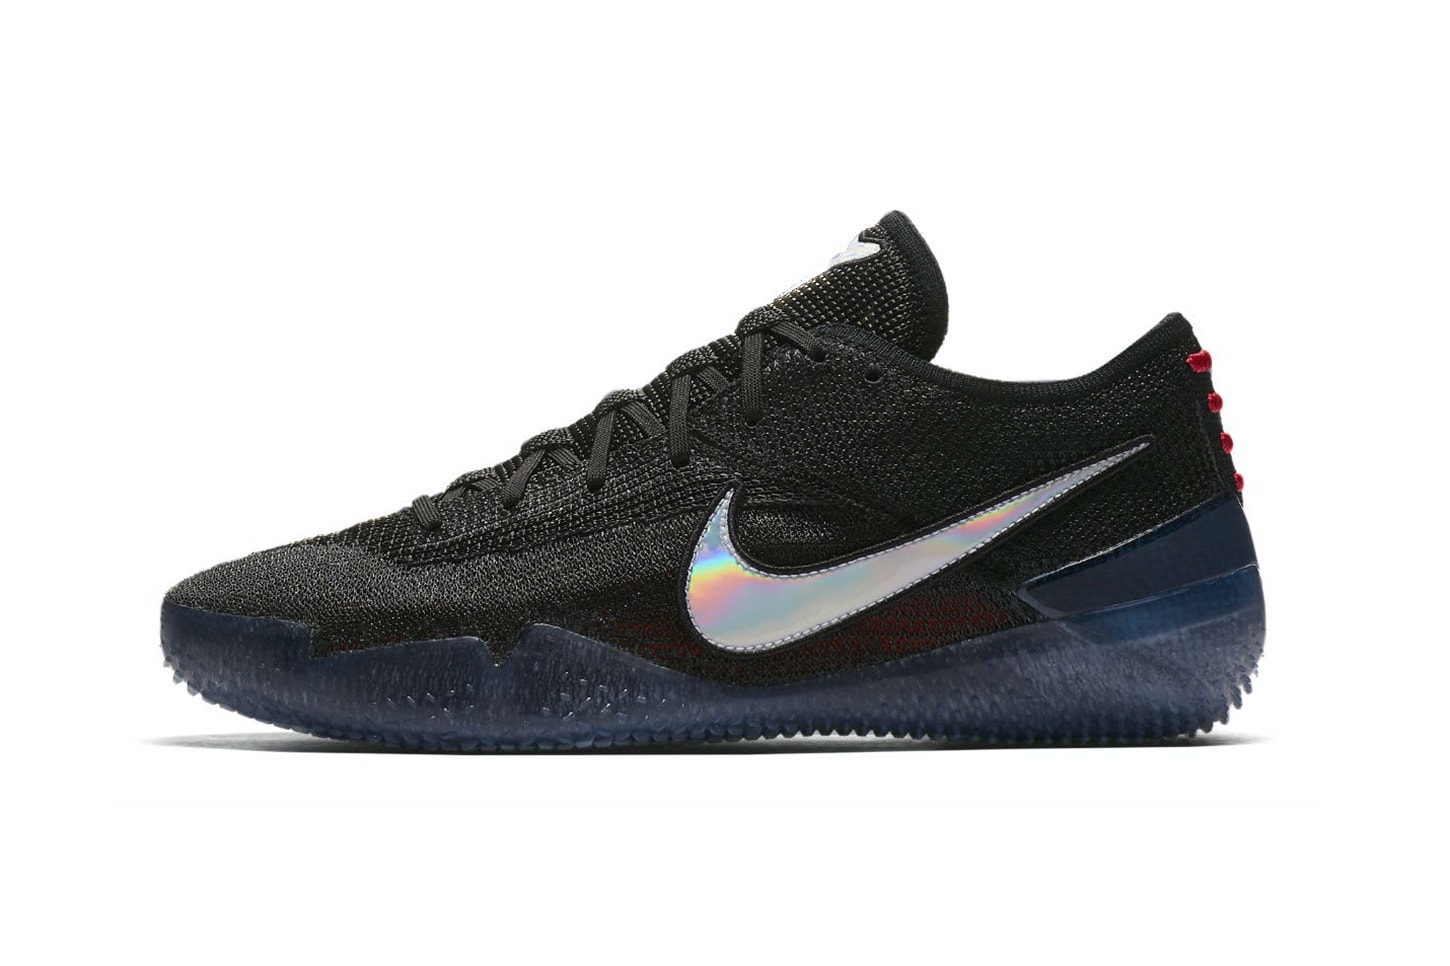 Nike Kobe NXT 360 official images nike basketball footwear april 2018 kobe bryant mamba day 13 release date info drop sneakers shoes